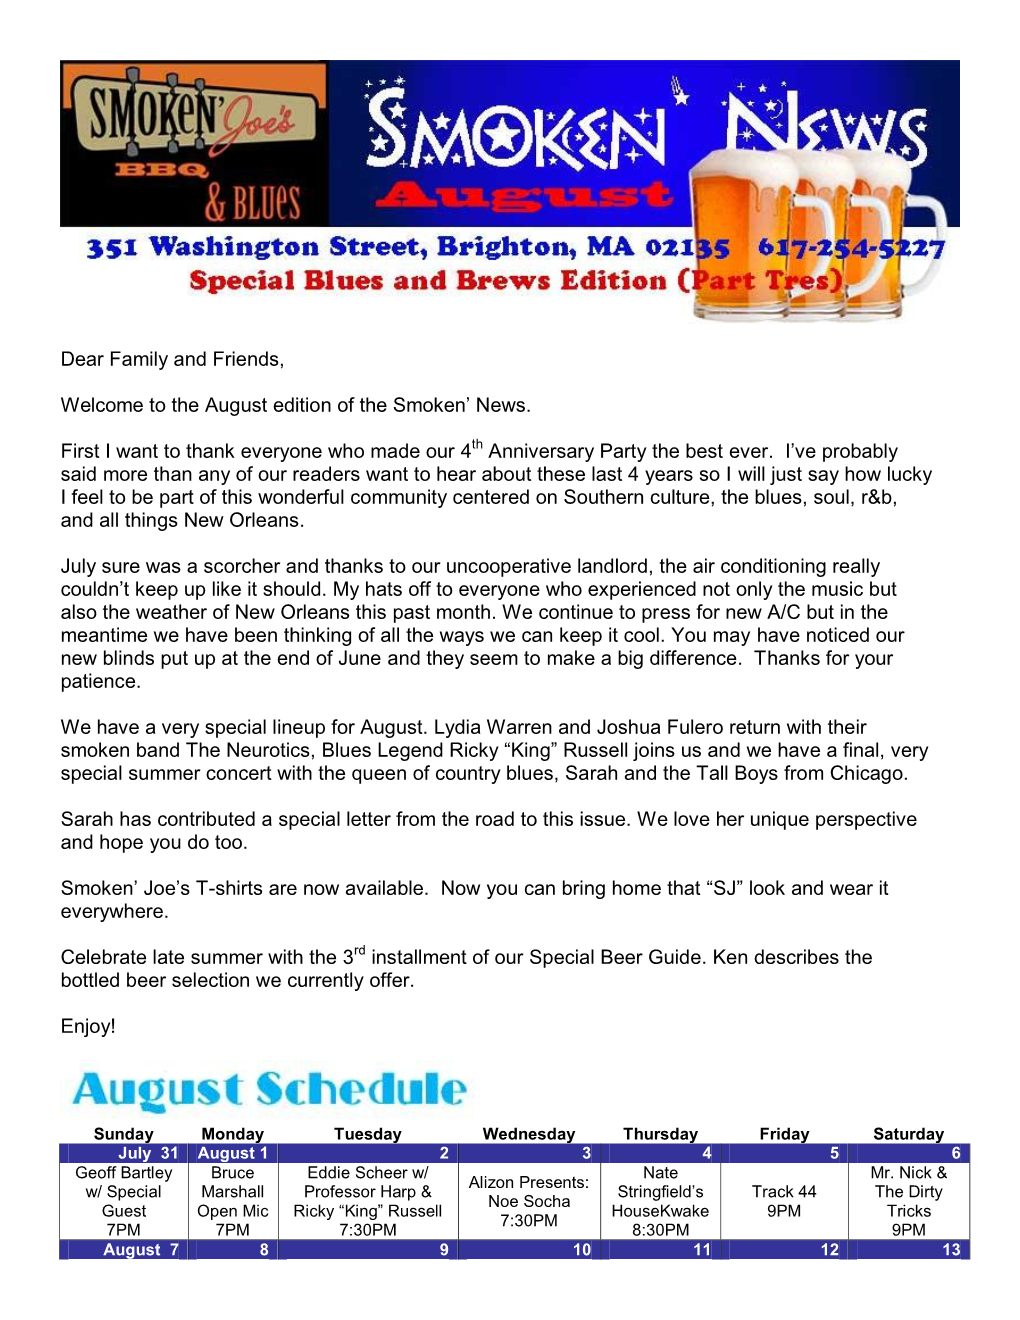 Dear Family and Friends, Welcome to the August Edition of the Smoken